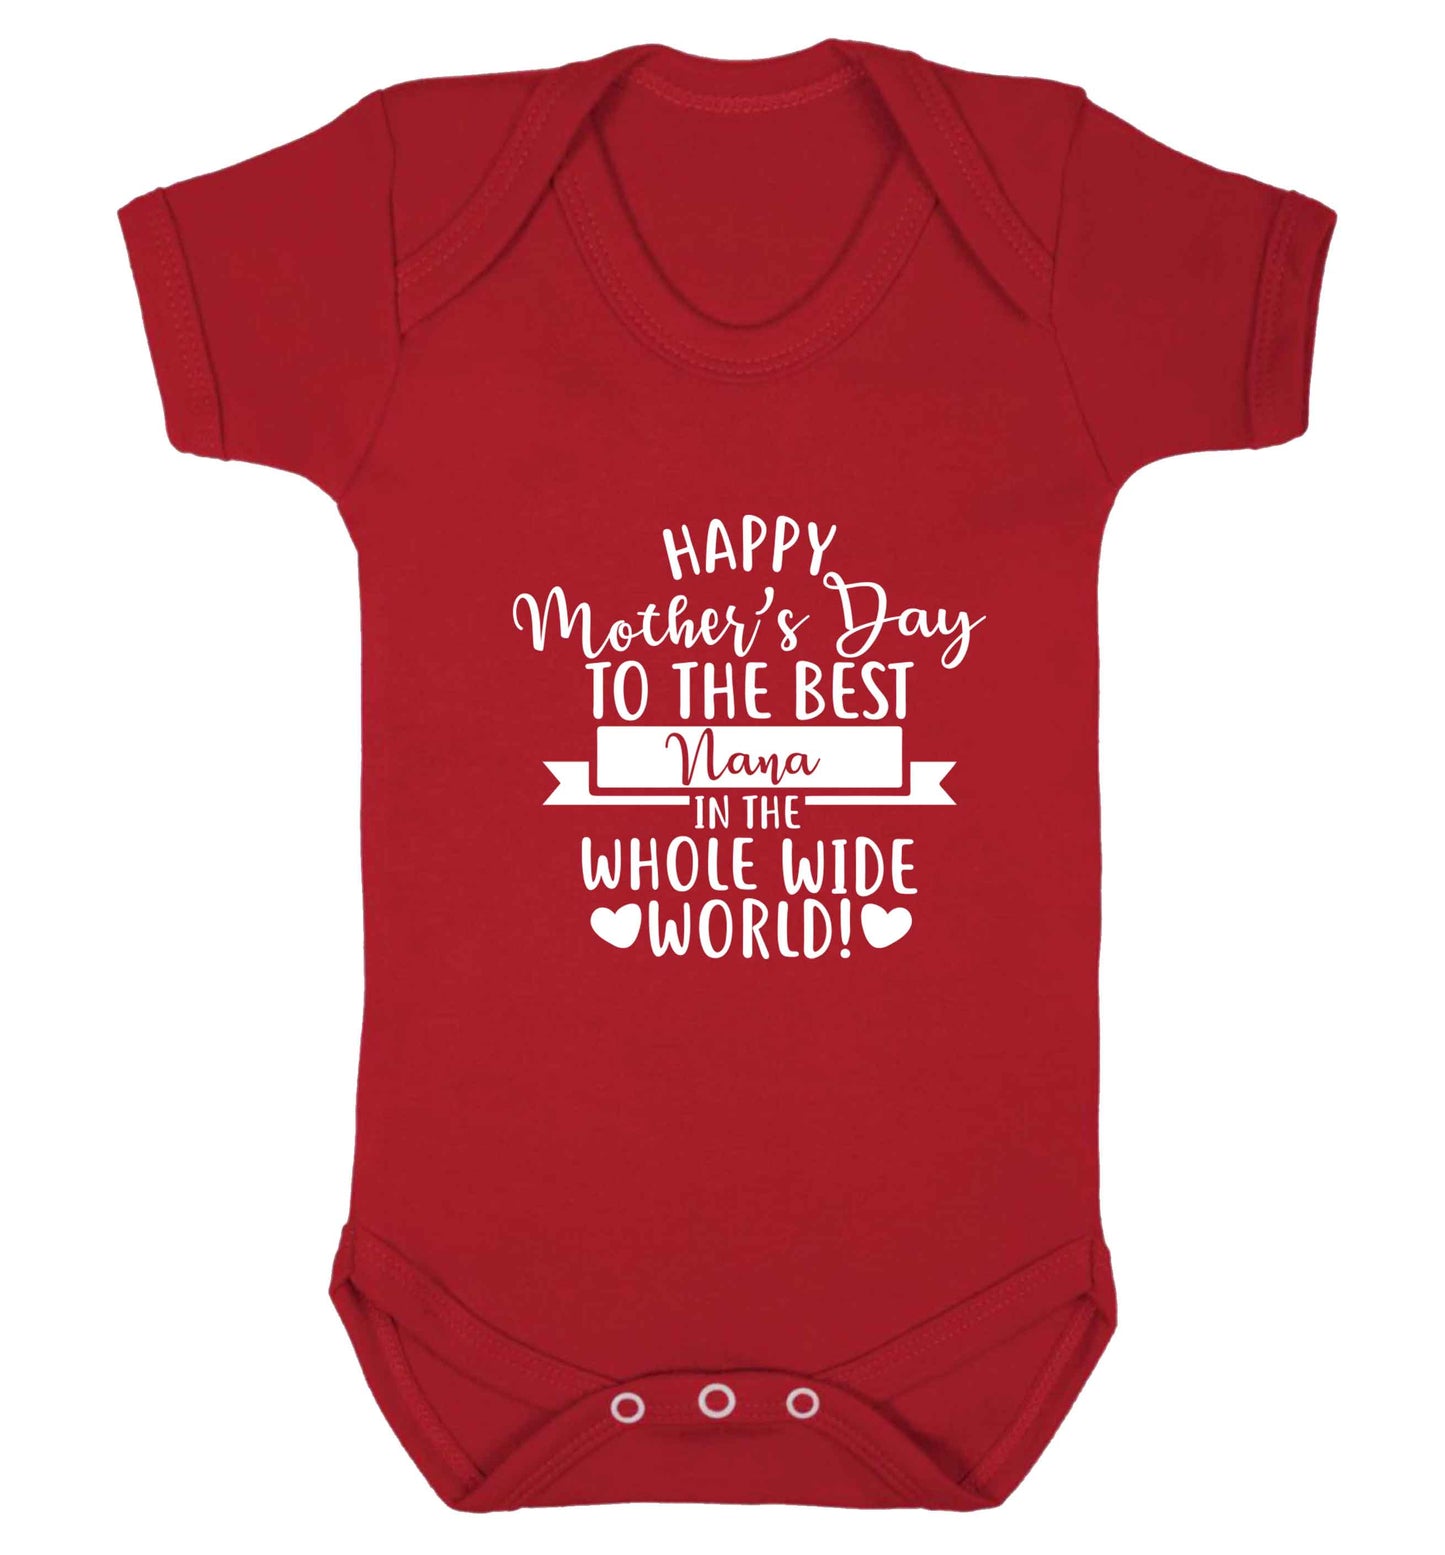 Happy mother's day to the best nana in the world baby vest red 18-24 months